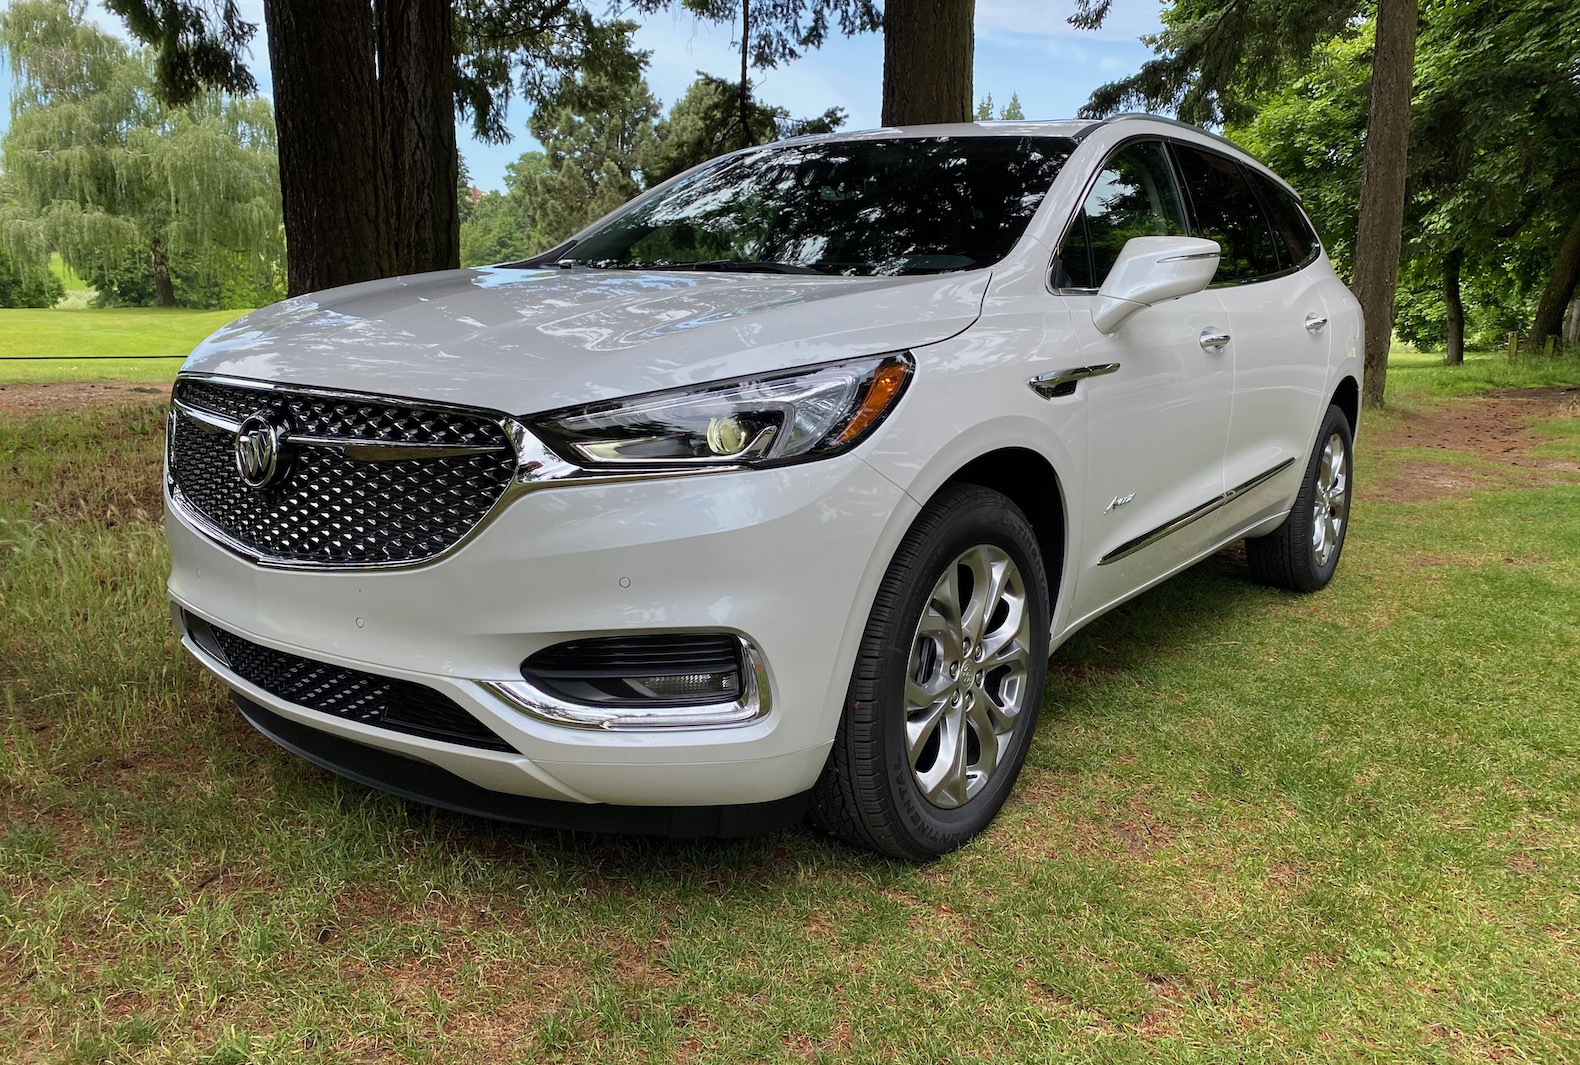 2020 Buick Enclave Review: The cosseting family SUV - The Torque Report